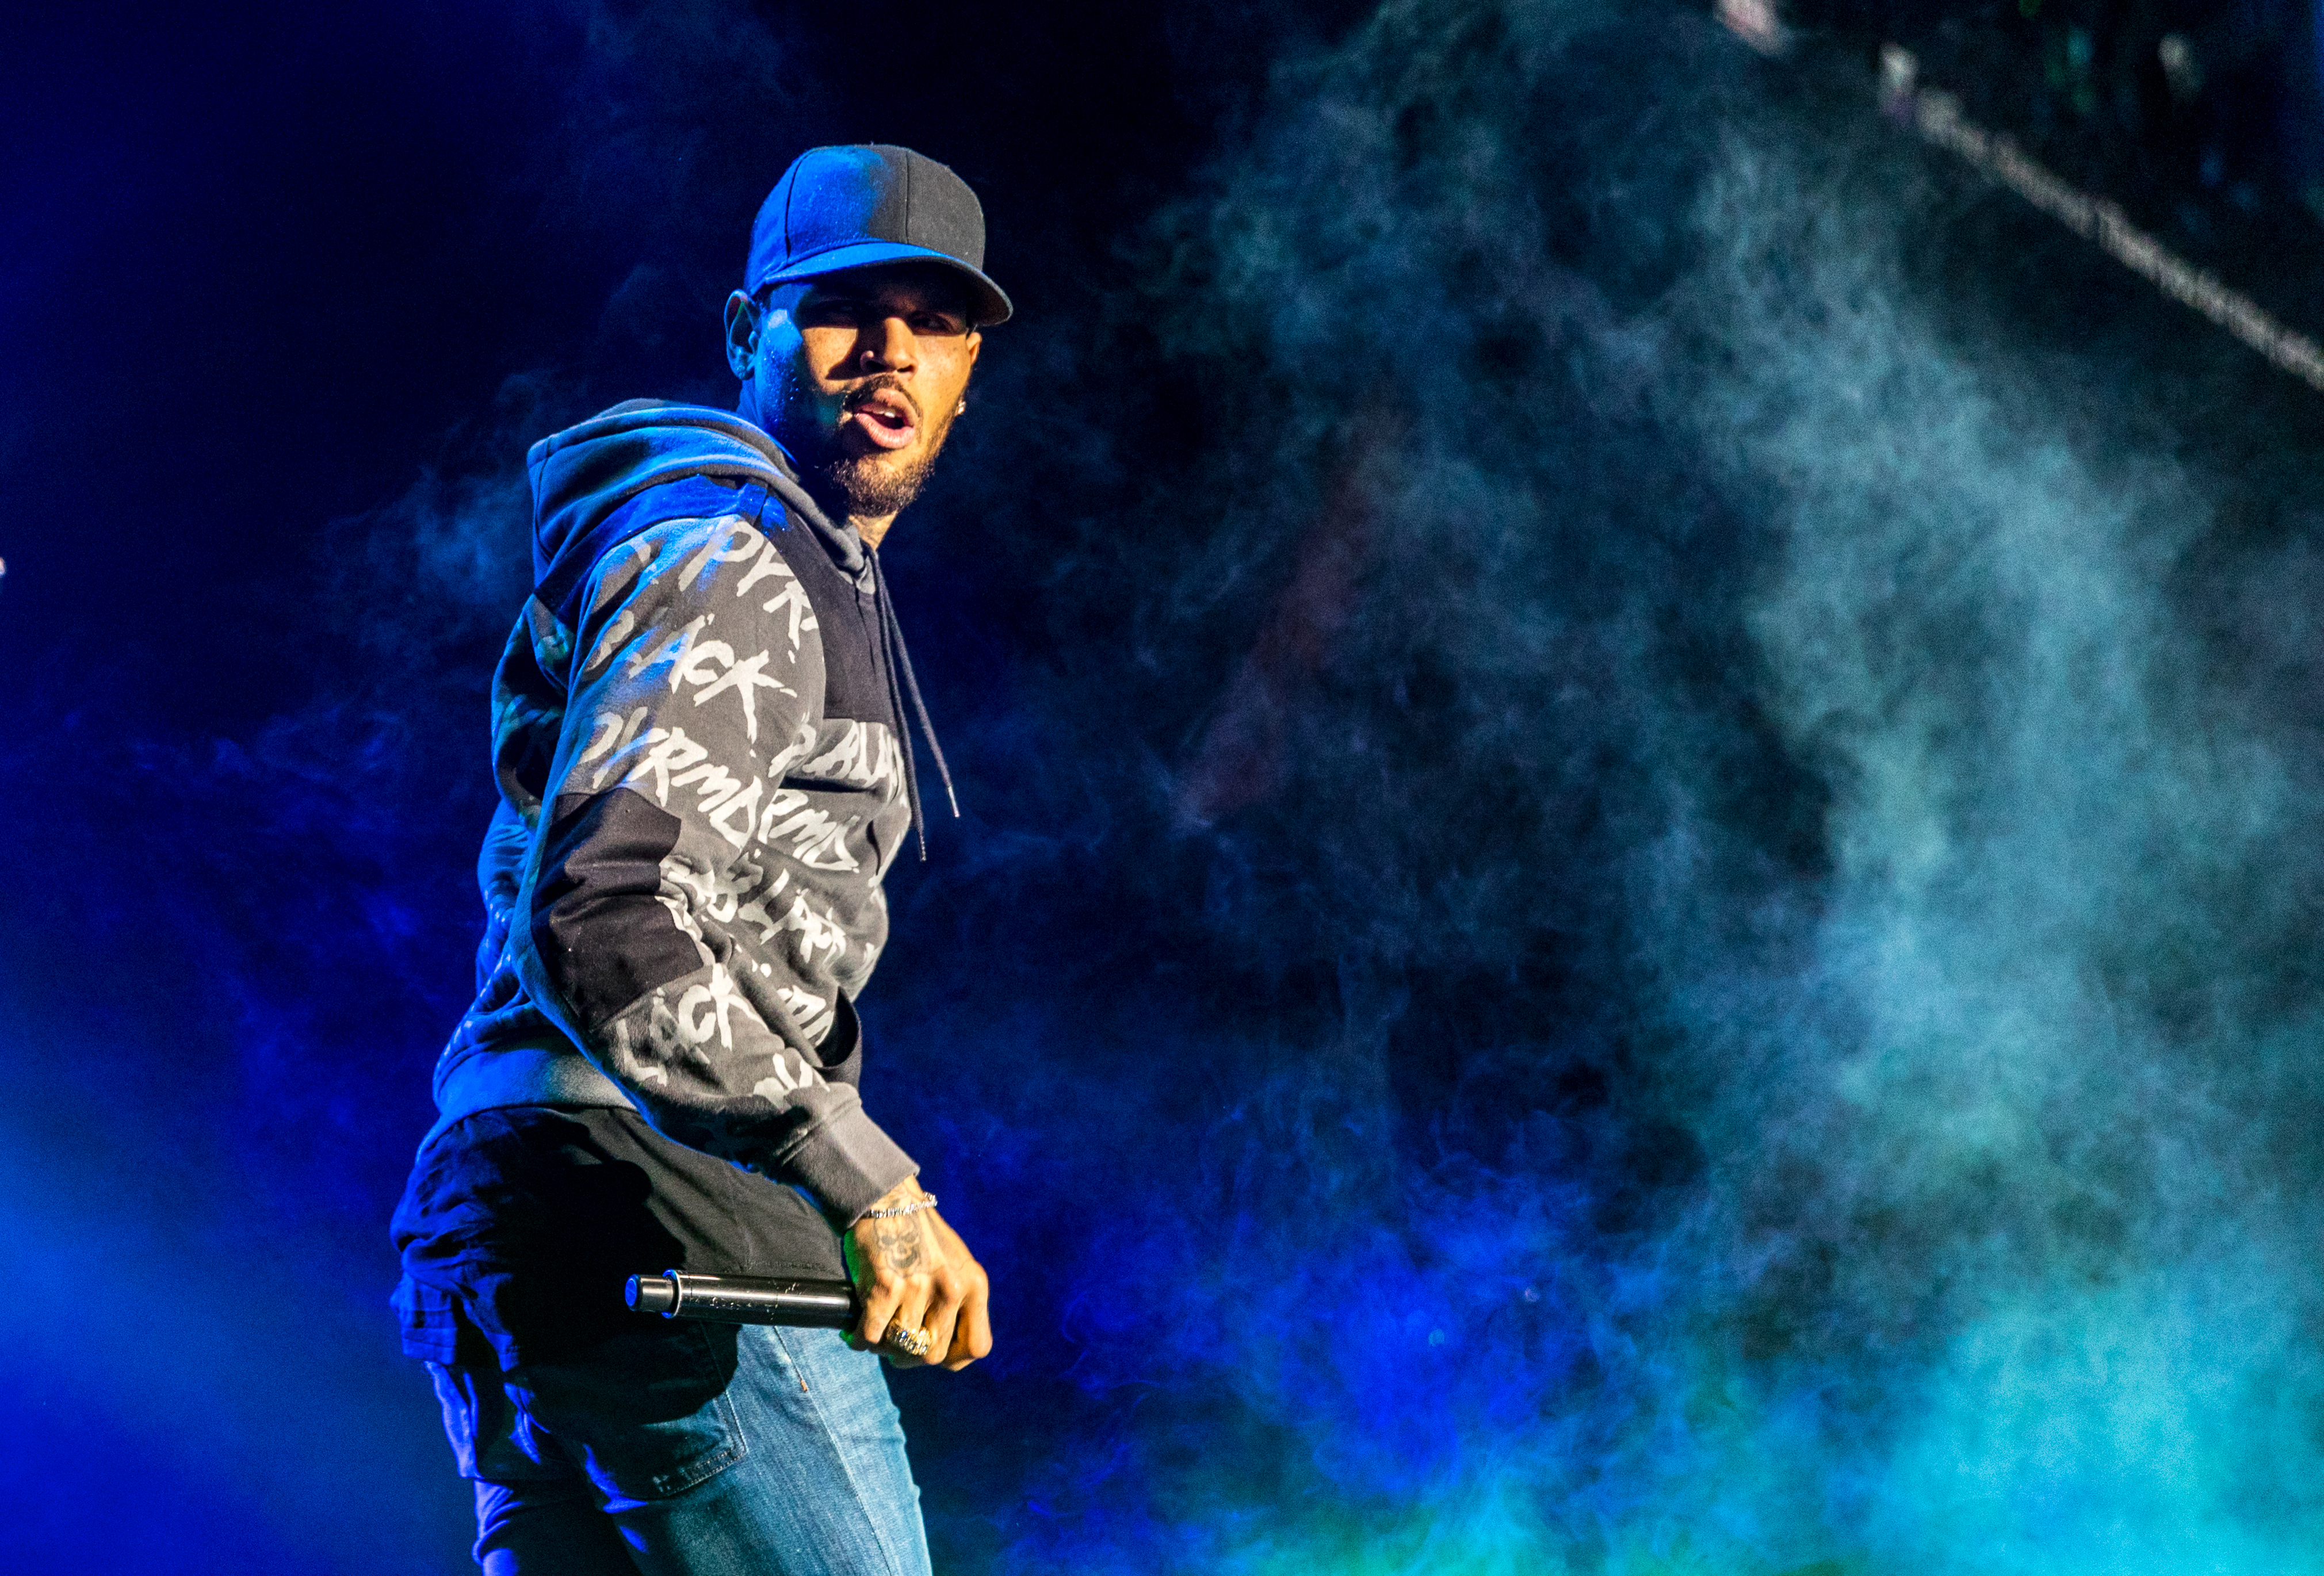 Chris Brown performs at Real 92.3's The Real Show at The Forum on November 5, 2016 in Inglewood, California. (Photo by Christopher Polk/Getty Images)